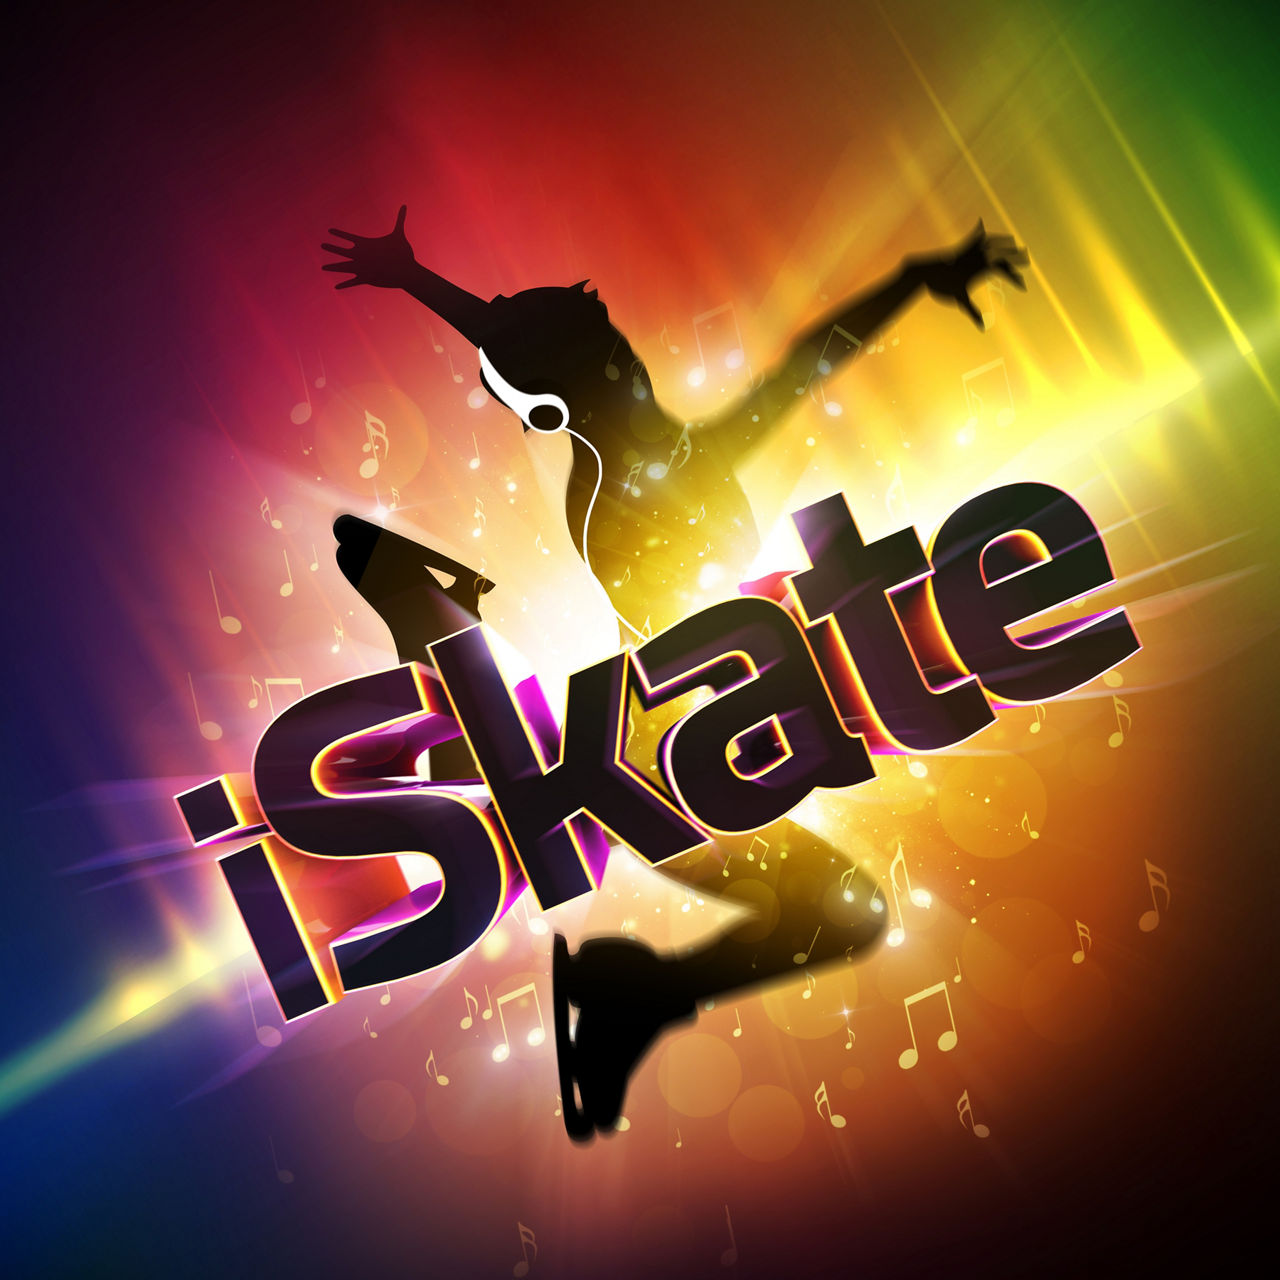 The colorful rainbow logo for the ice skating show iSkate.